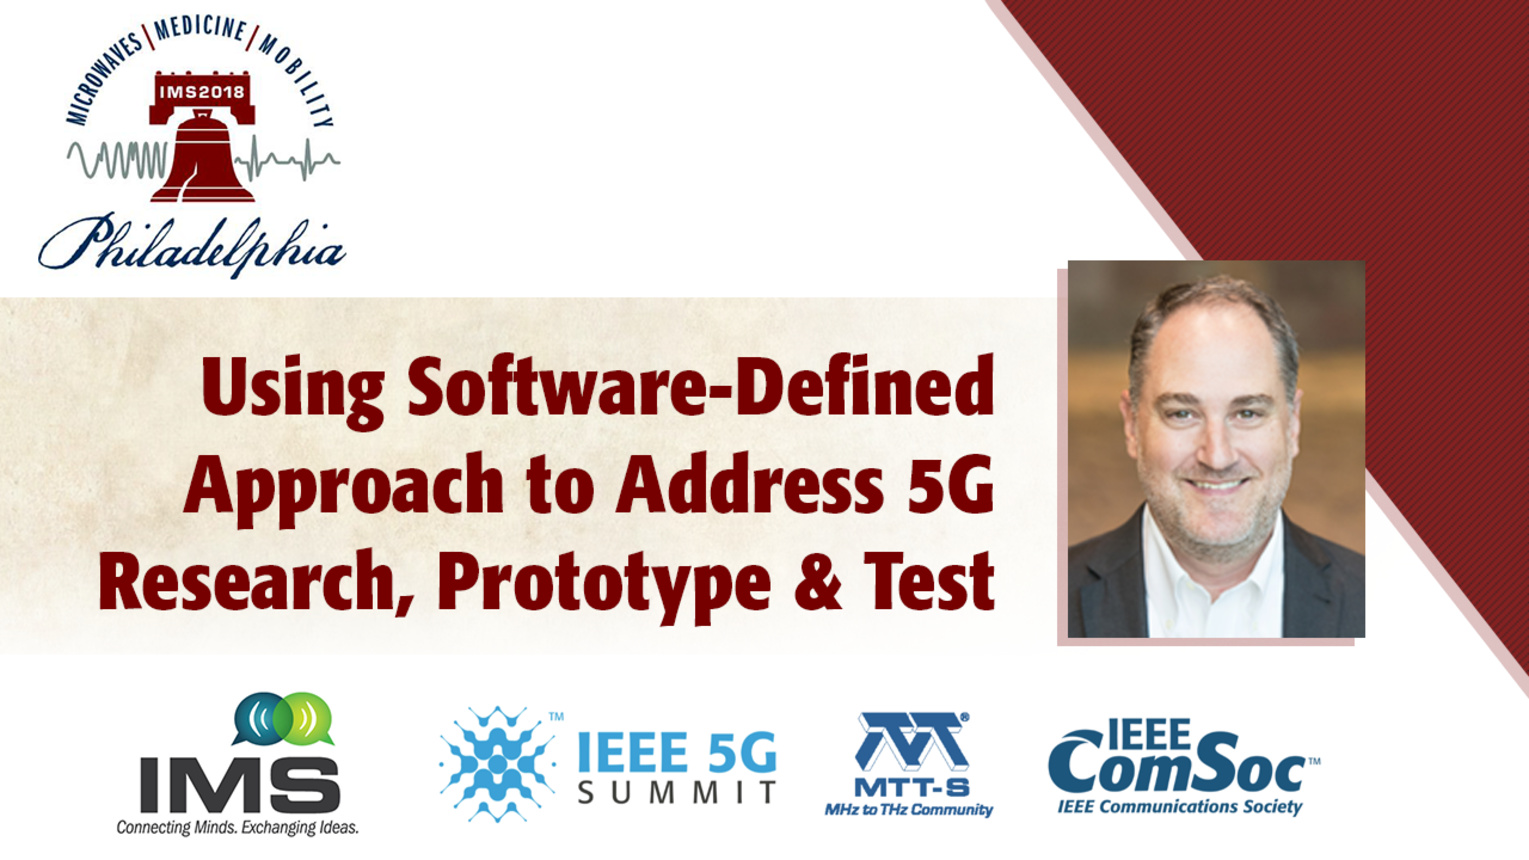 'Using Software-Defined Approach to Address 5G Research, Prototype and Test'